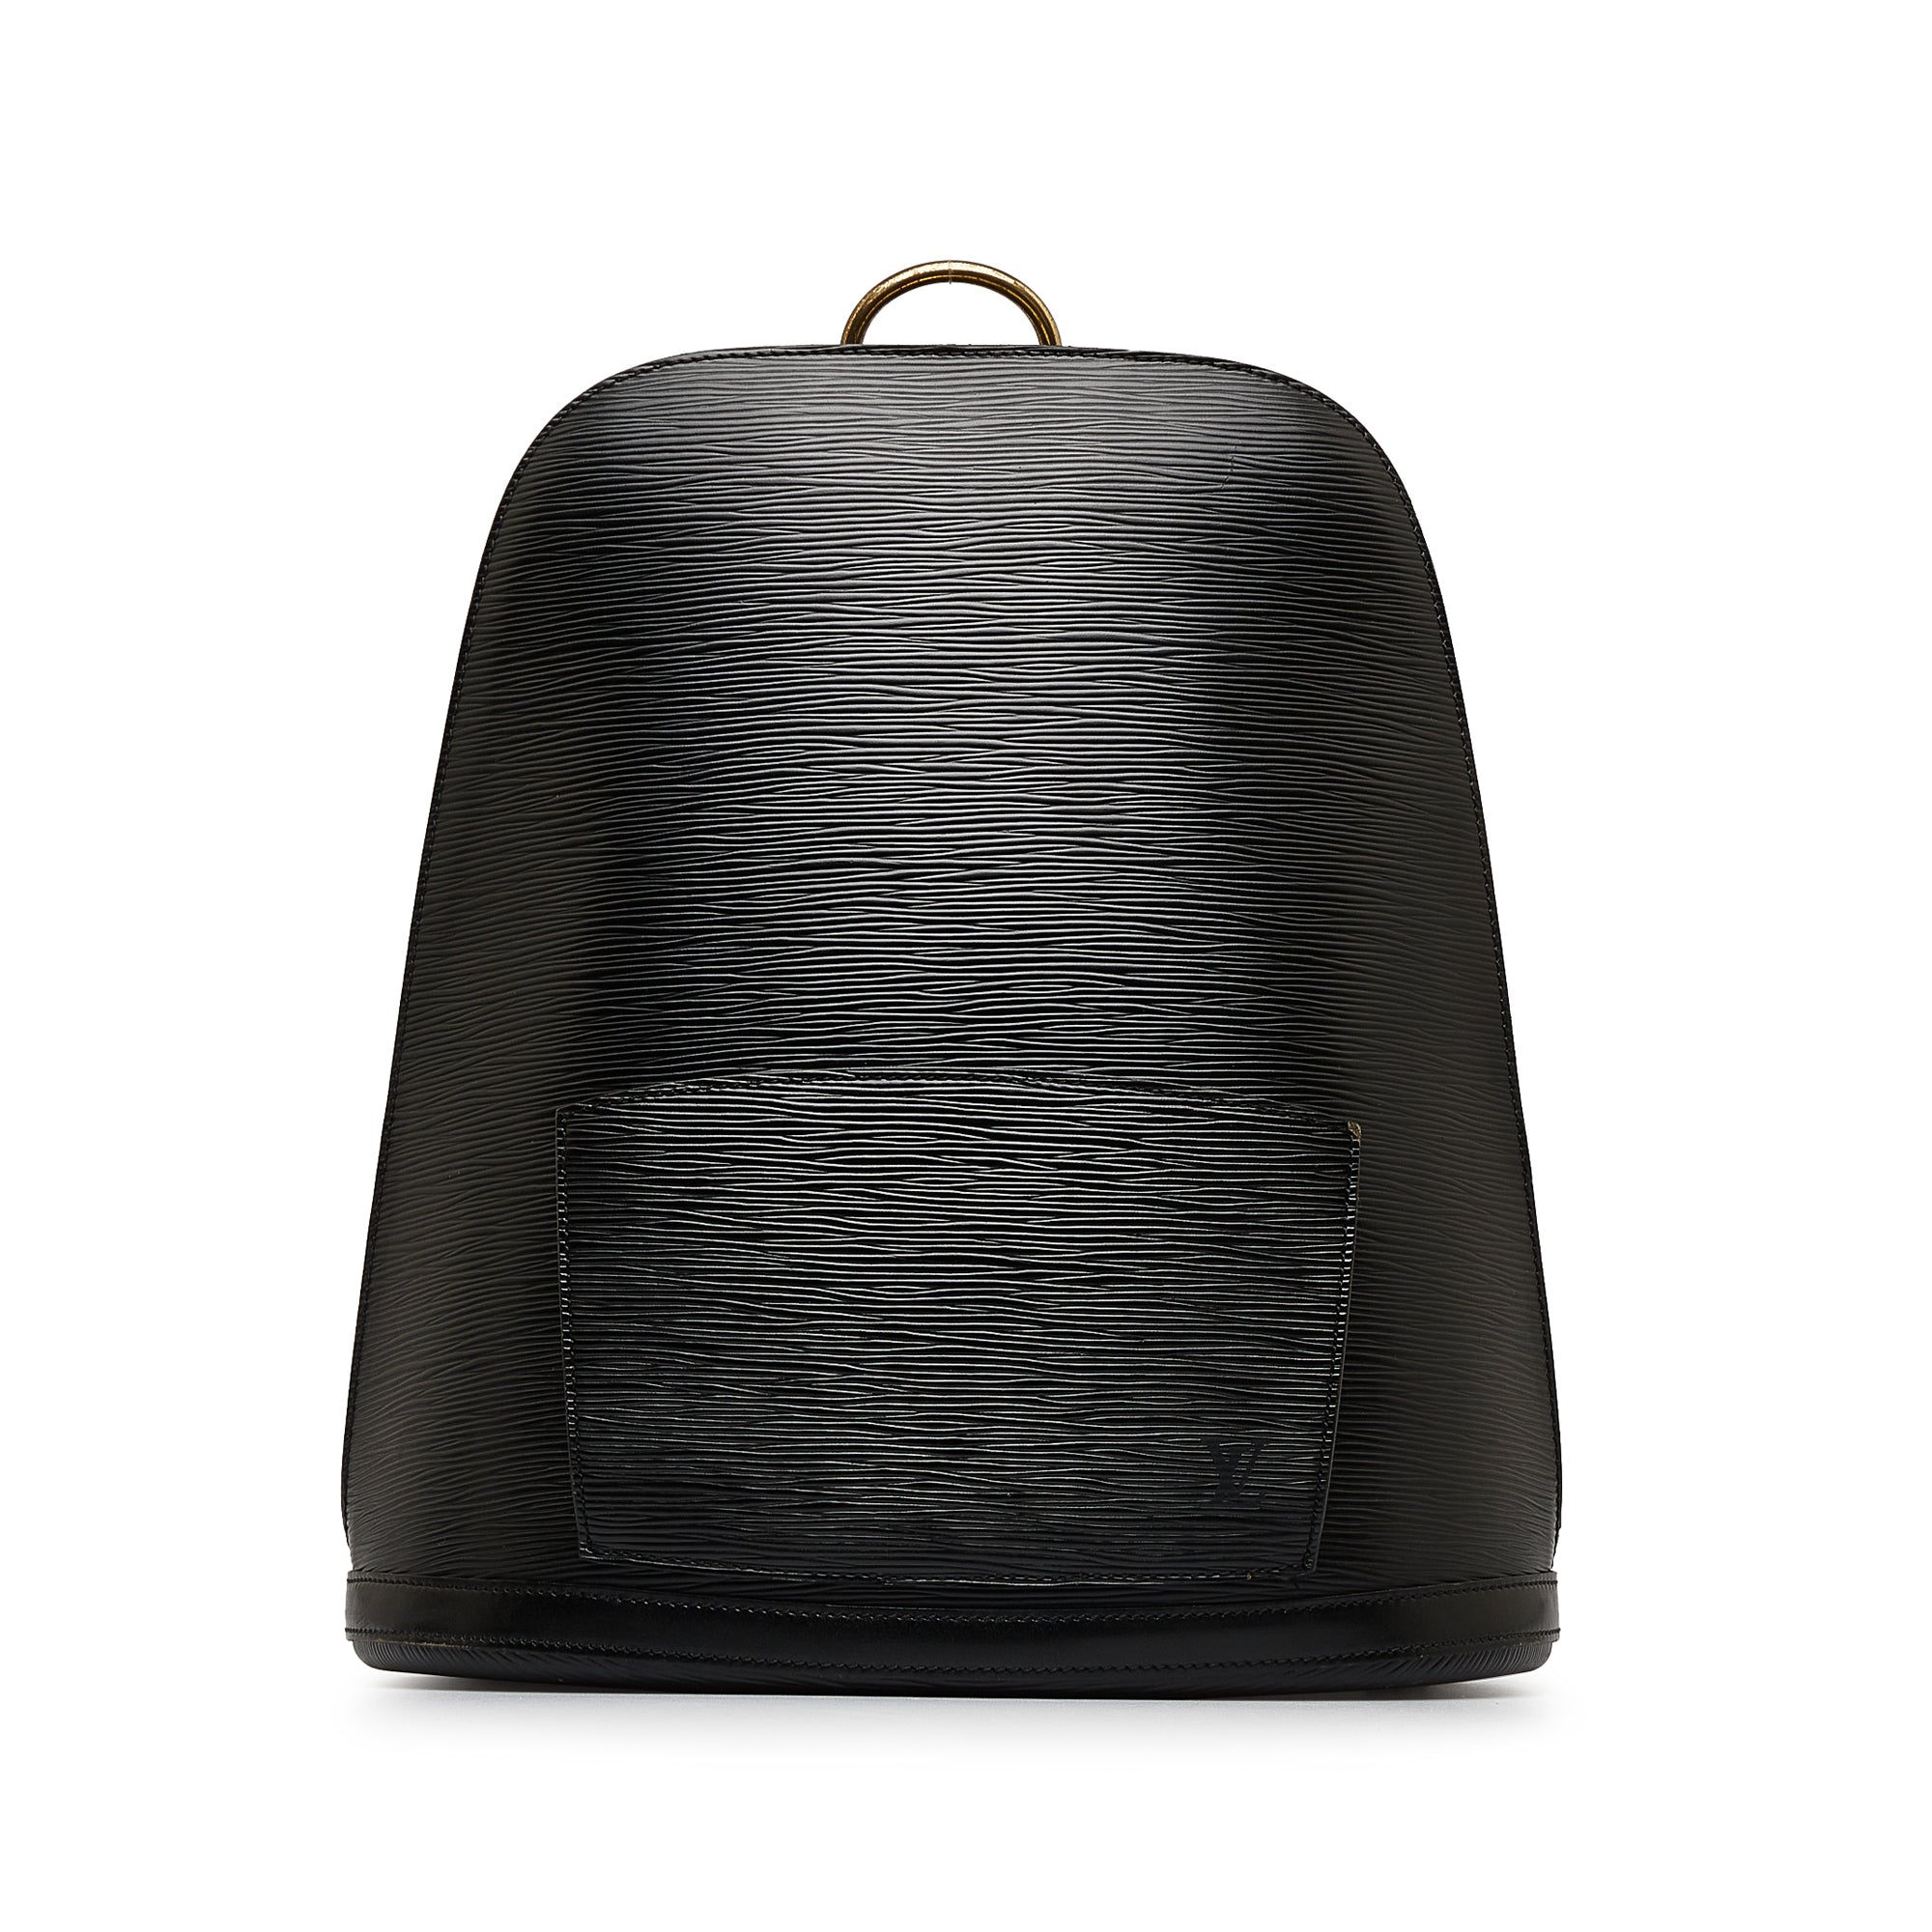 epi leather louis vuitton backpack